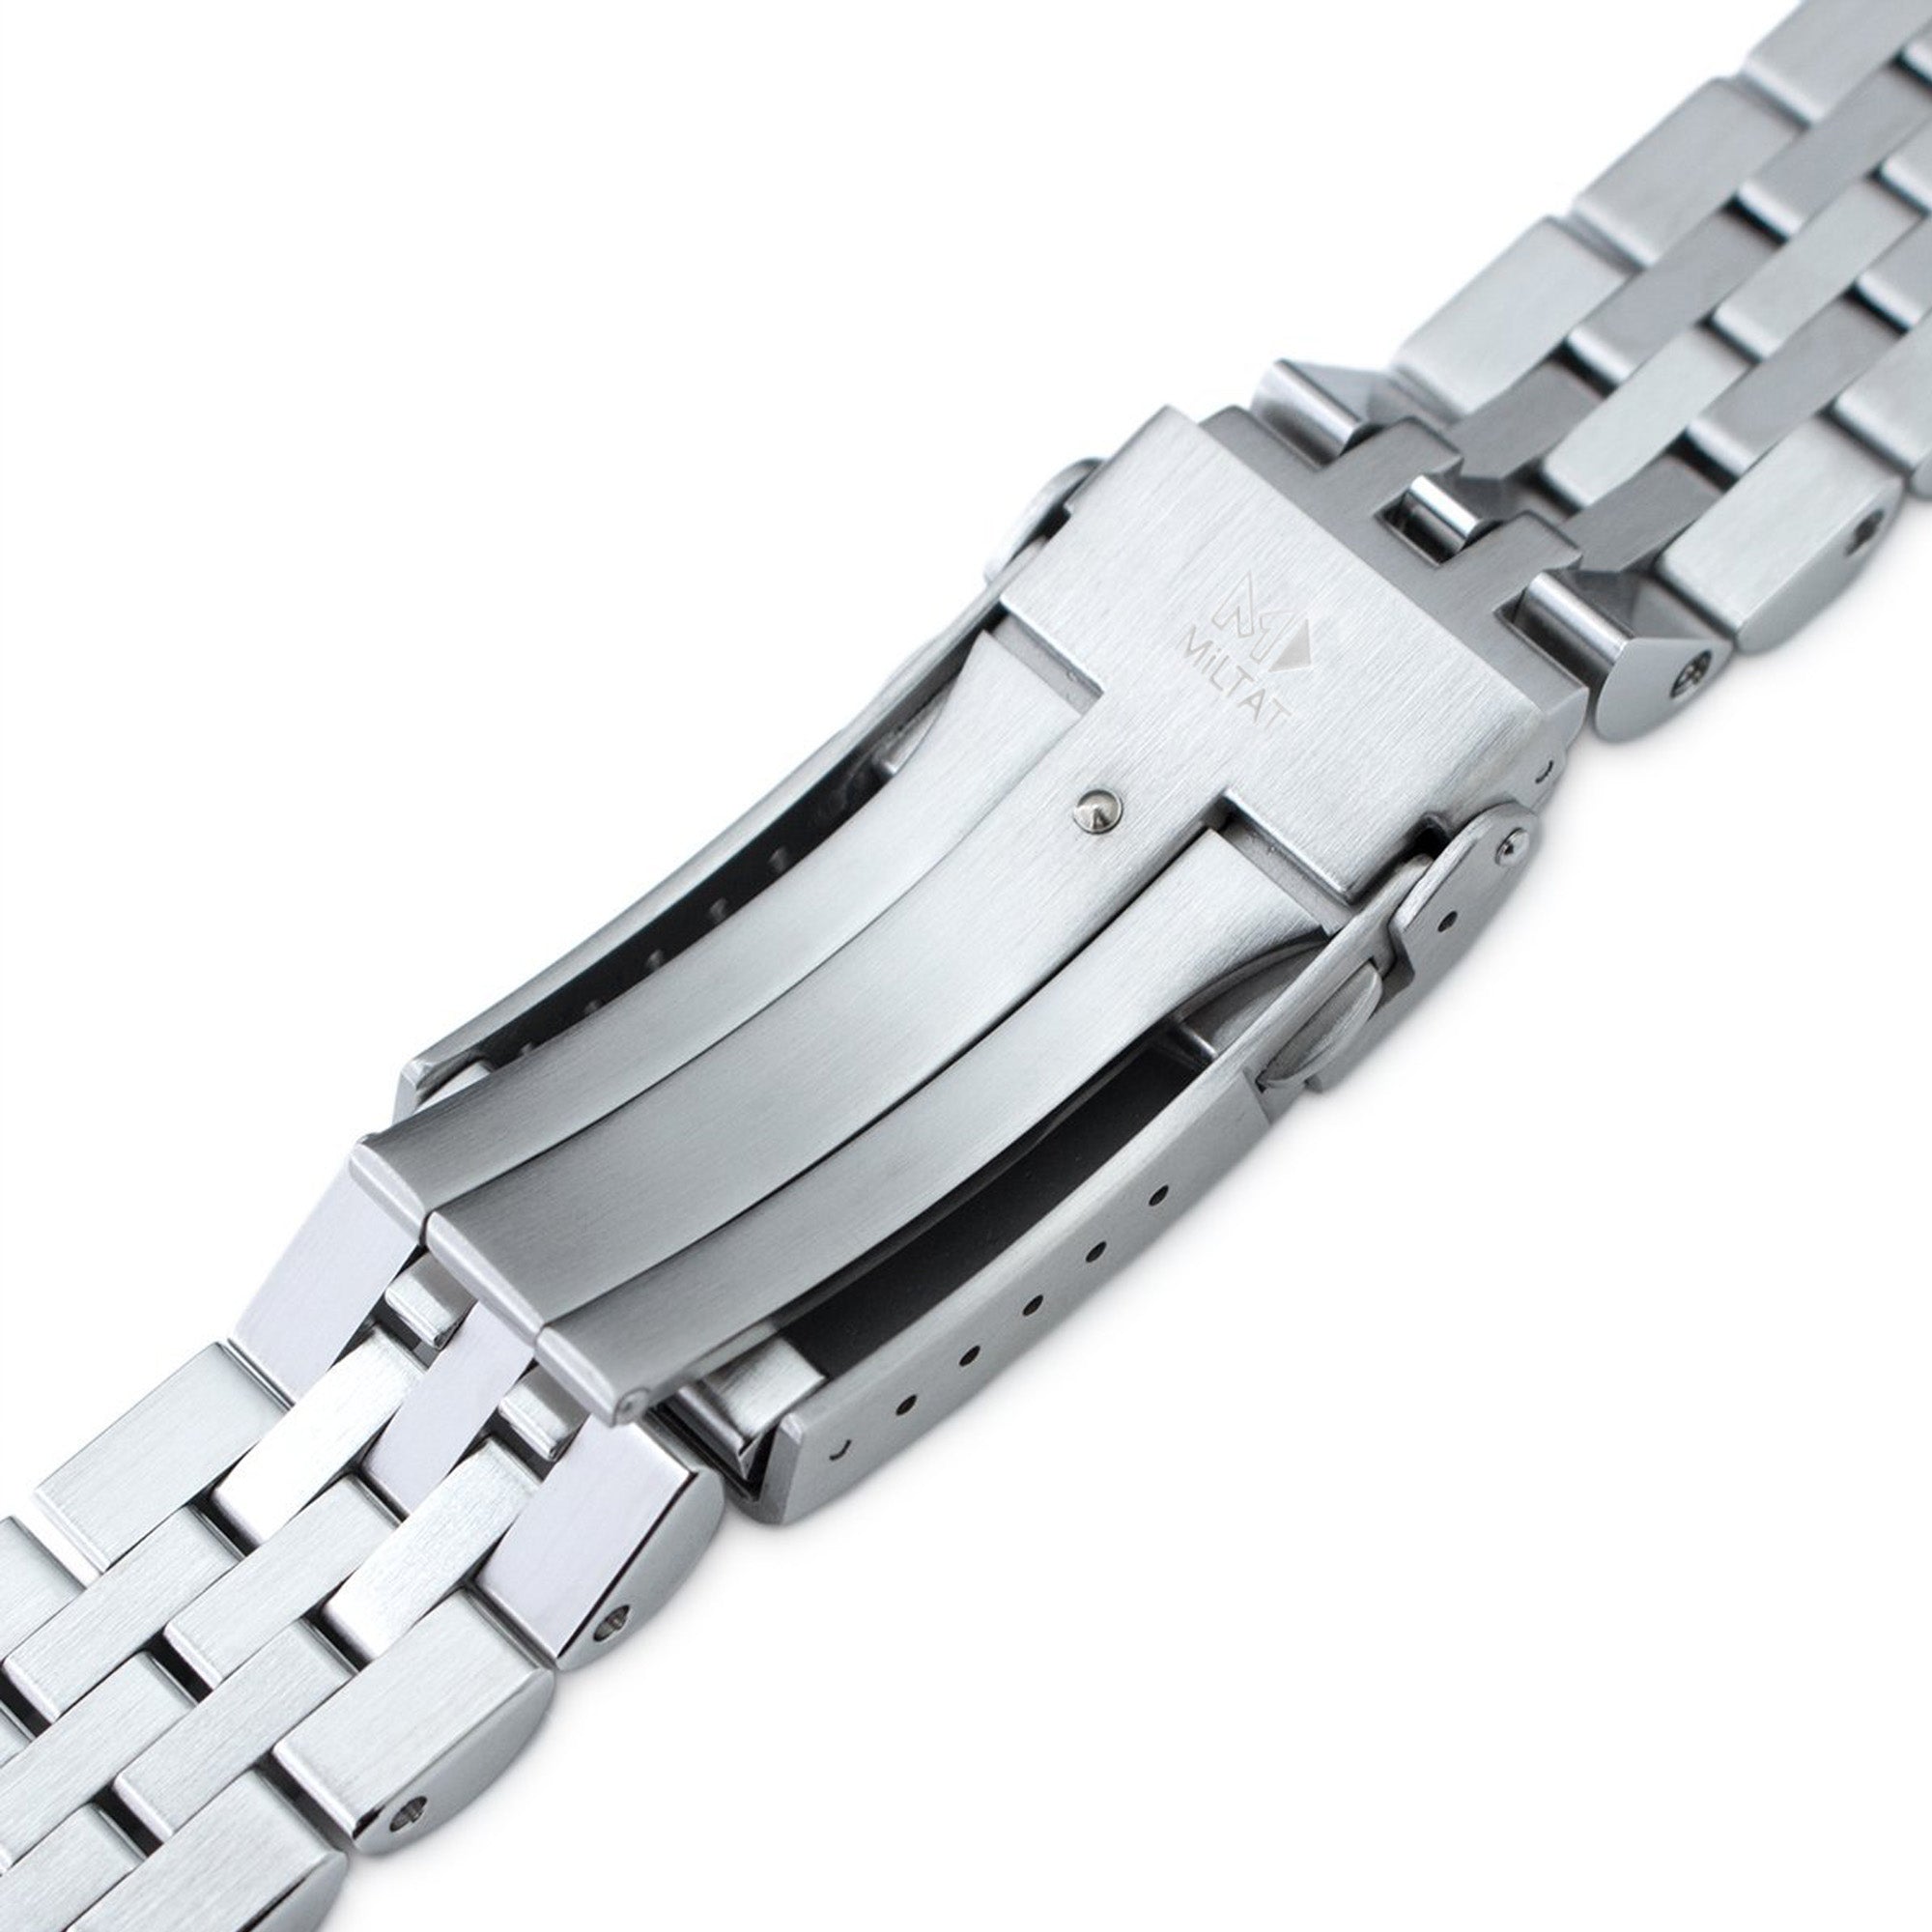 22mm Angus-J Louis JUB Watch Band compatible with Seiko SKX007, 316L Stainless Steel Brushed/Polished V-Clasp